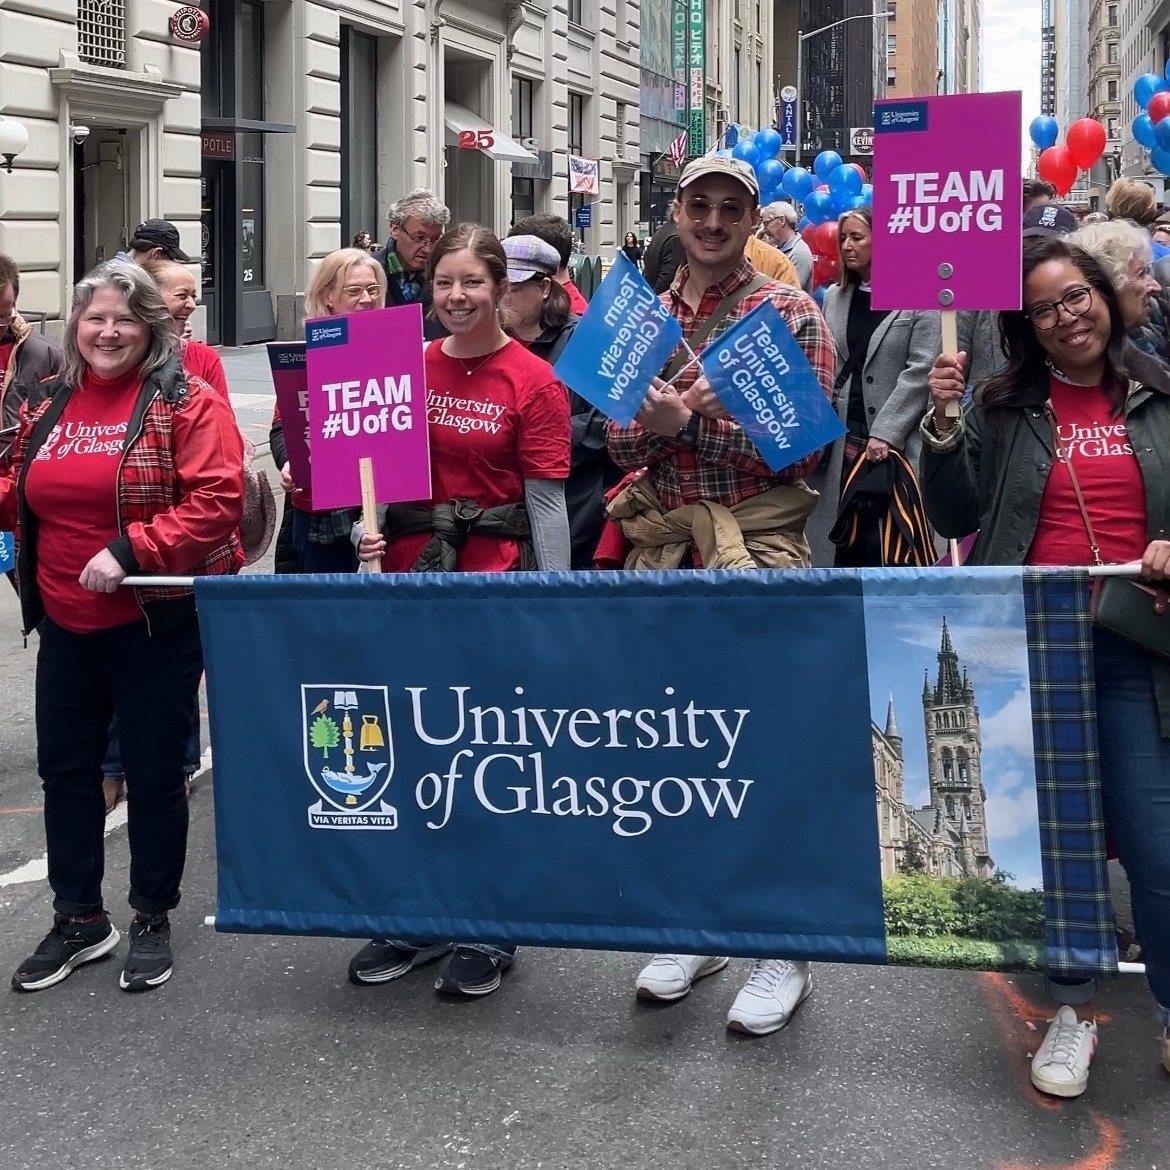 #TeamUofG had the chance to attend #TartanDay with our US based alumni to celebrate Scotland's connection with the United States in New York City! 🏴󠁧󠁢󠁳󠁣󠁴󠁿🇺🇸We are already looking forward to next year's celebration! #MyTartanDay #TartanDayParade